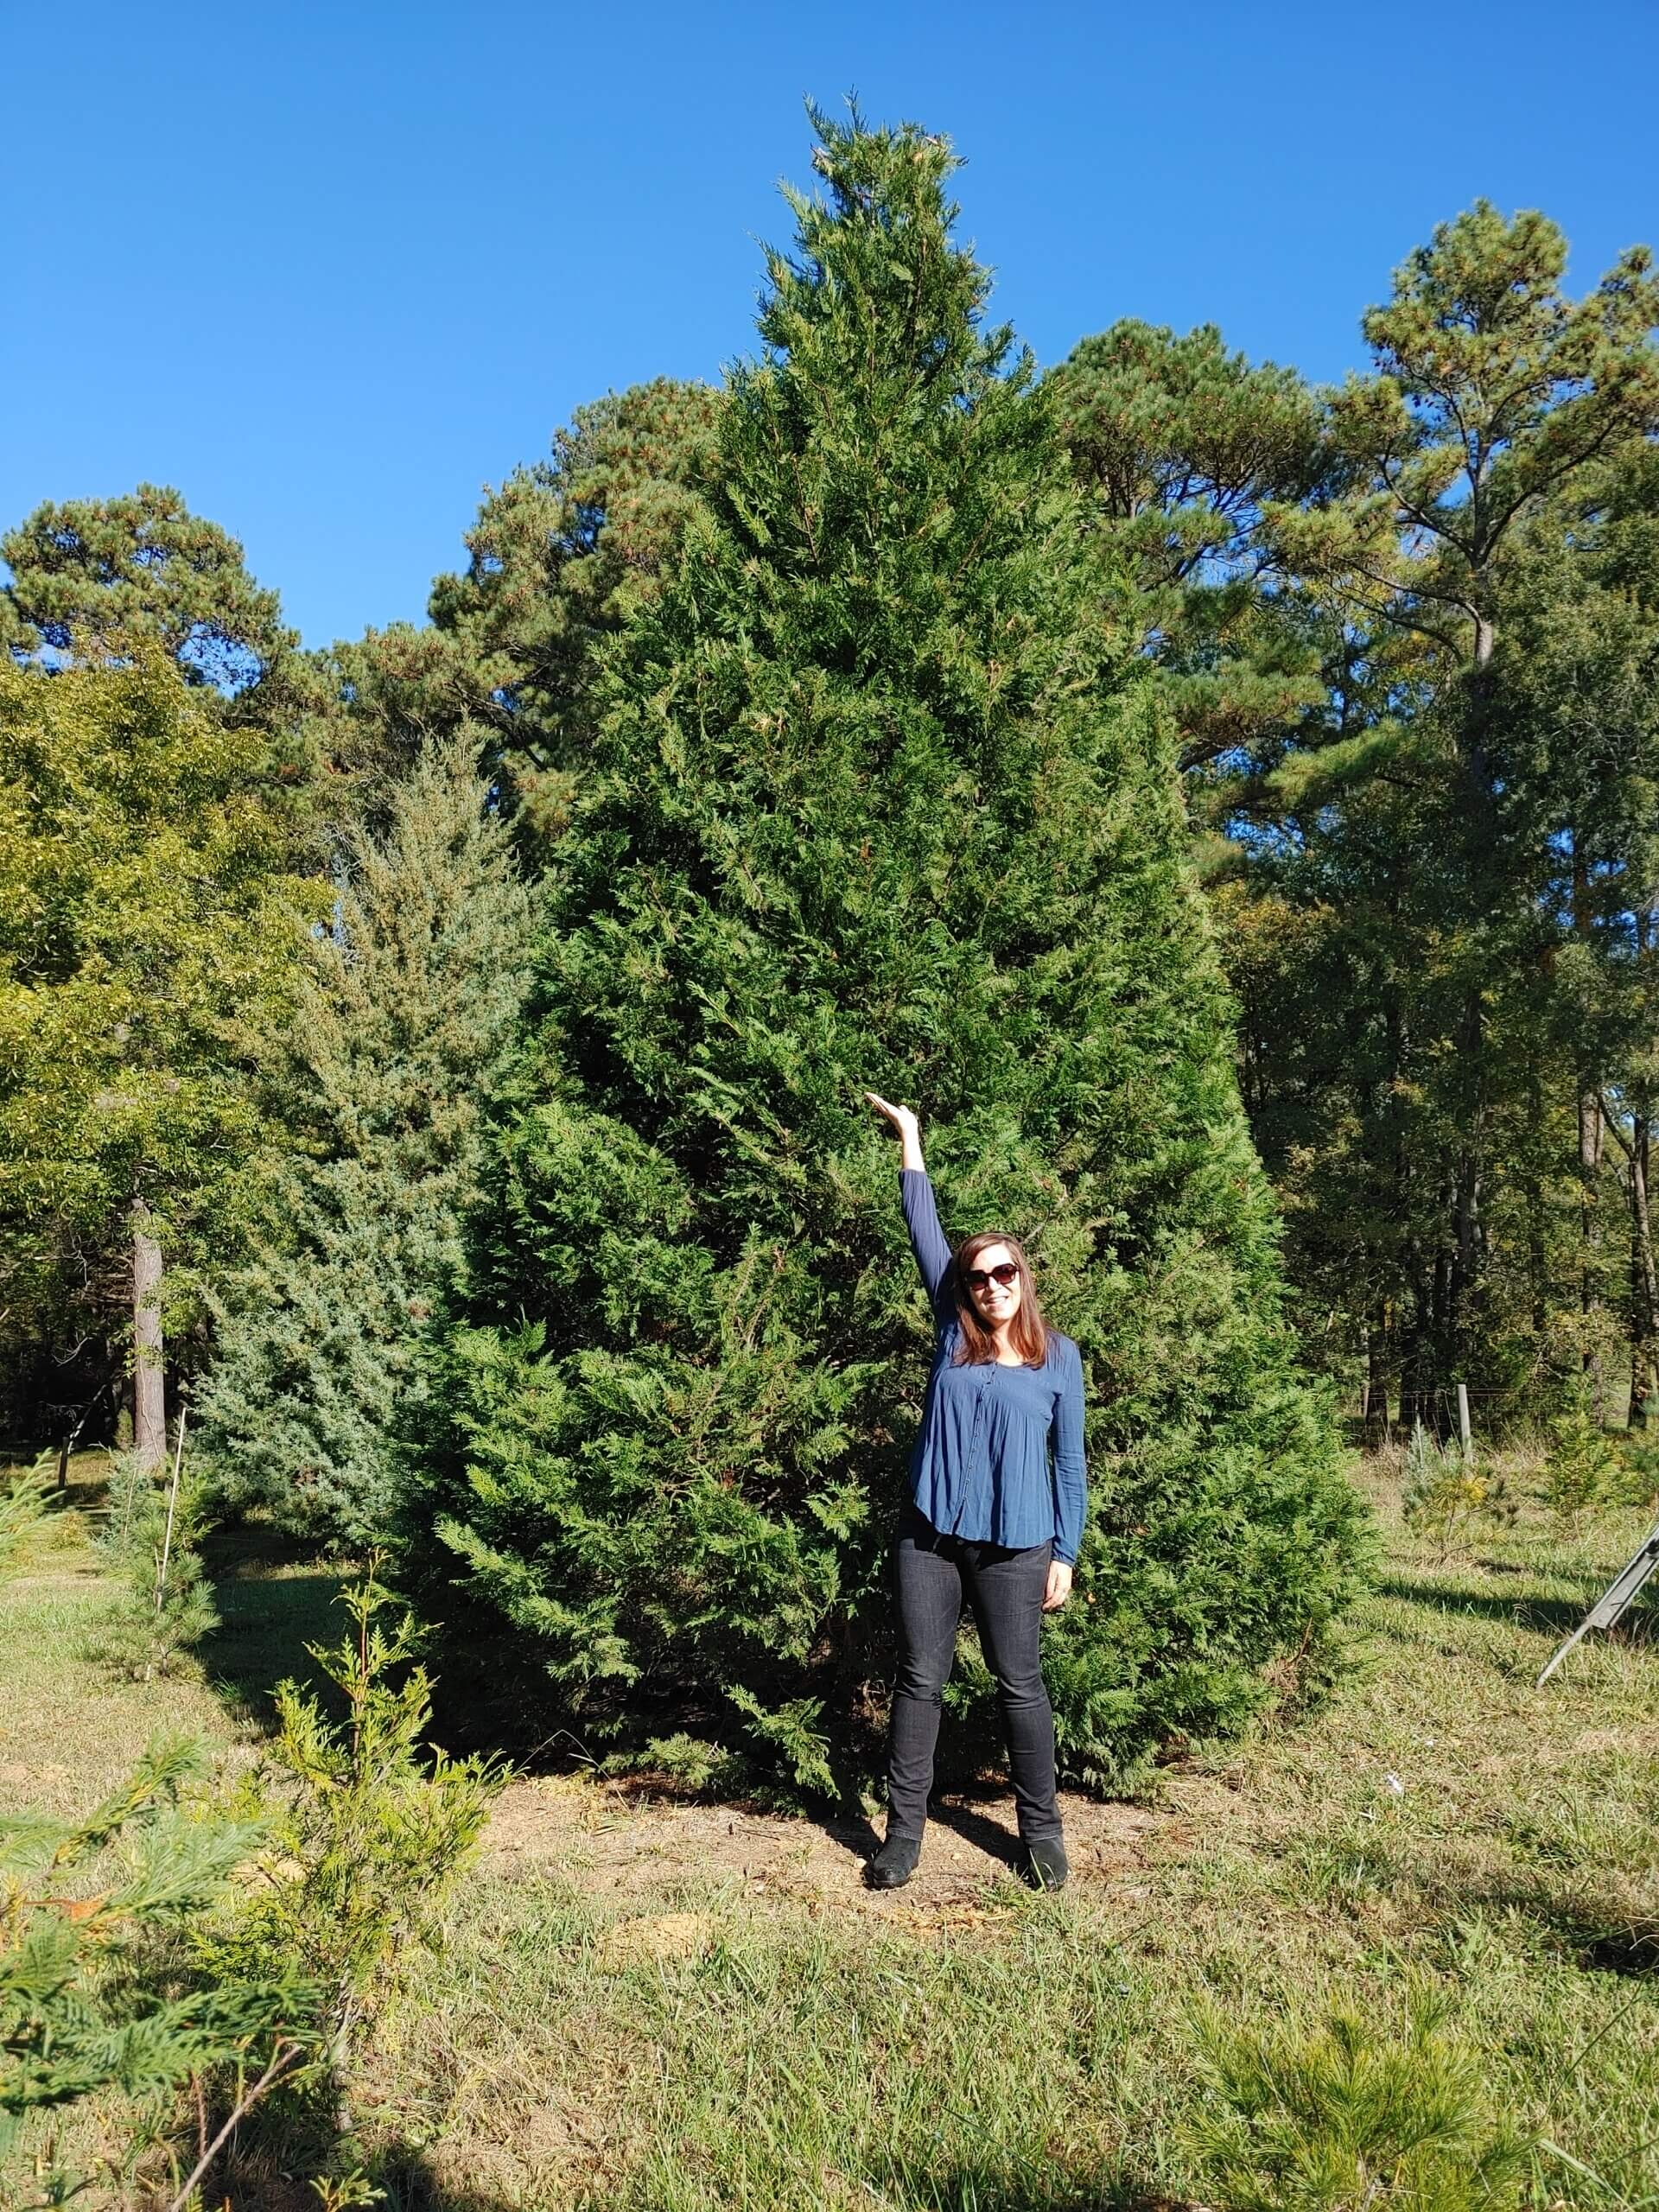 The Phillips Farms Christmas tree